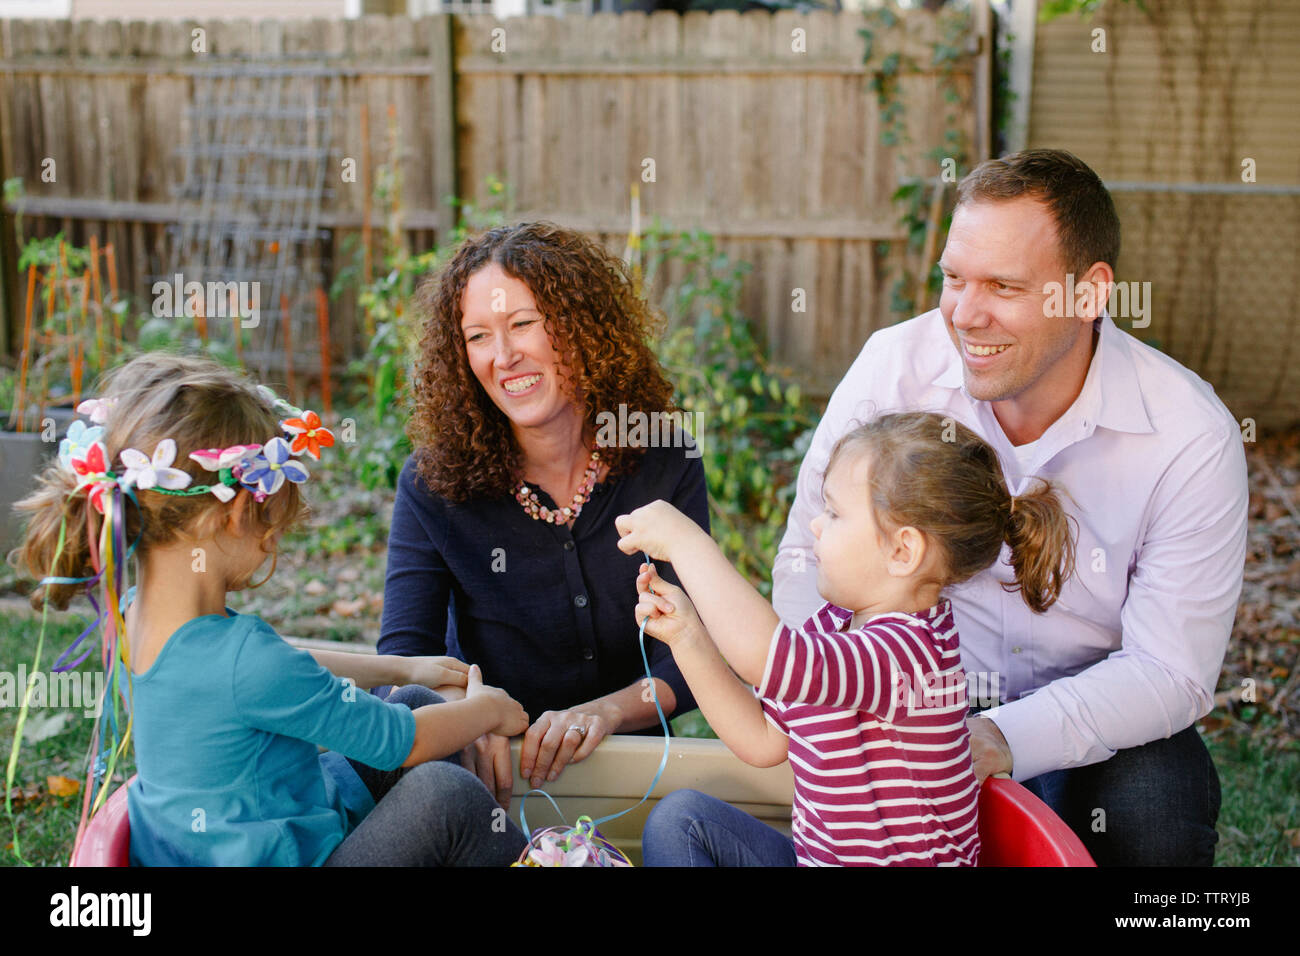 Two little girls play while their parents look affectionately on Stock Photo